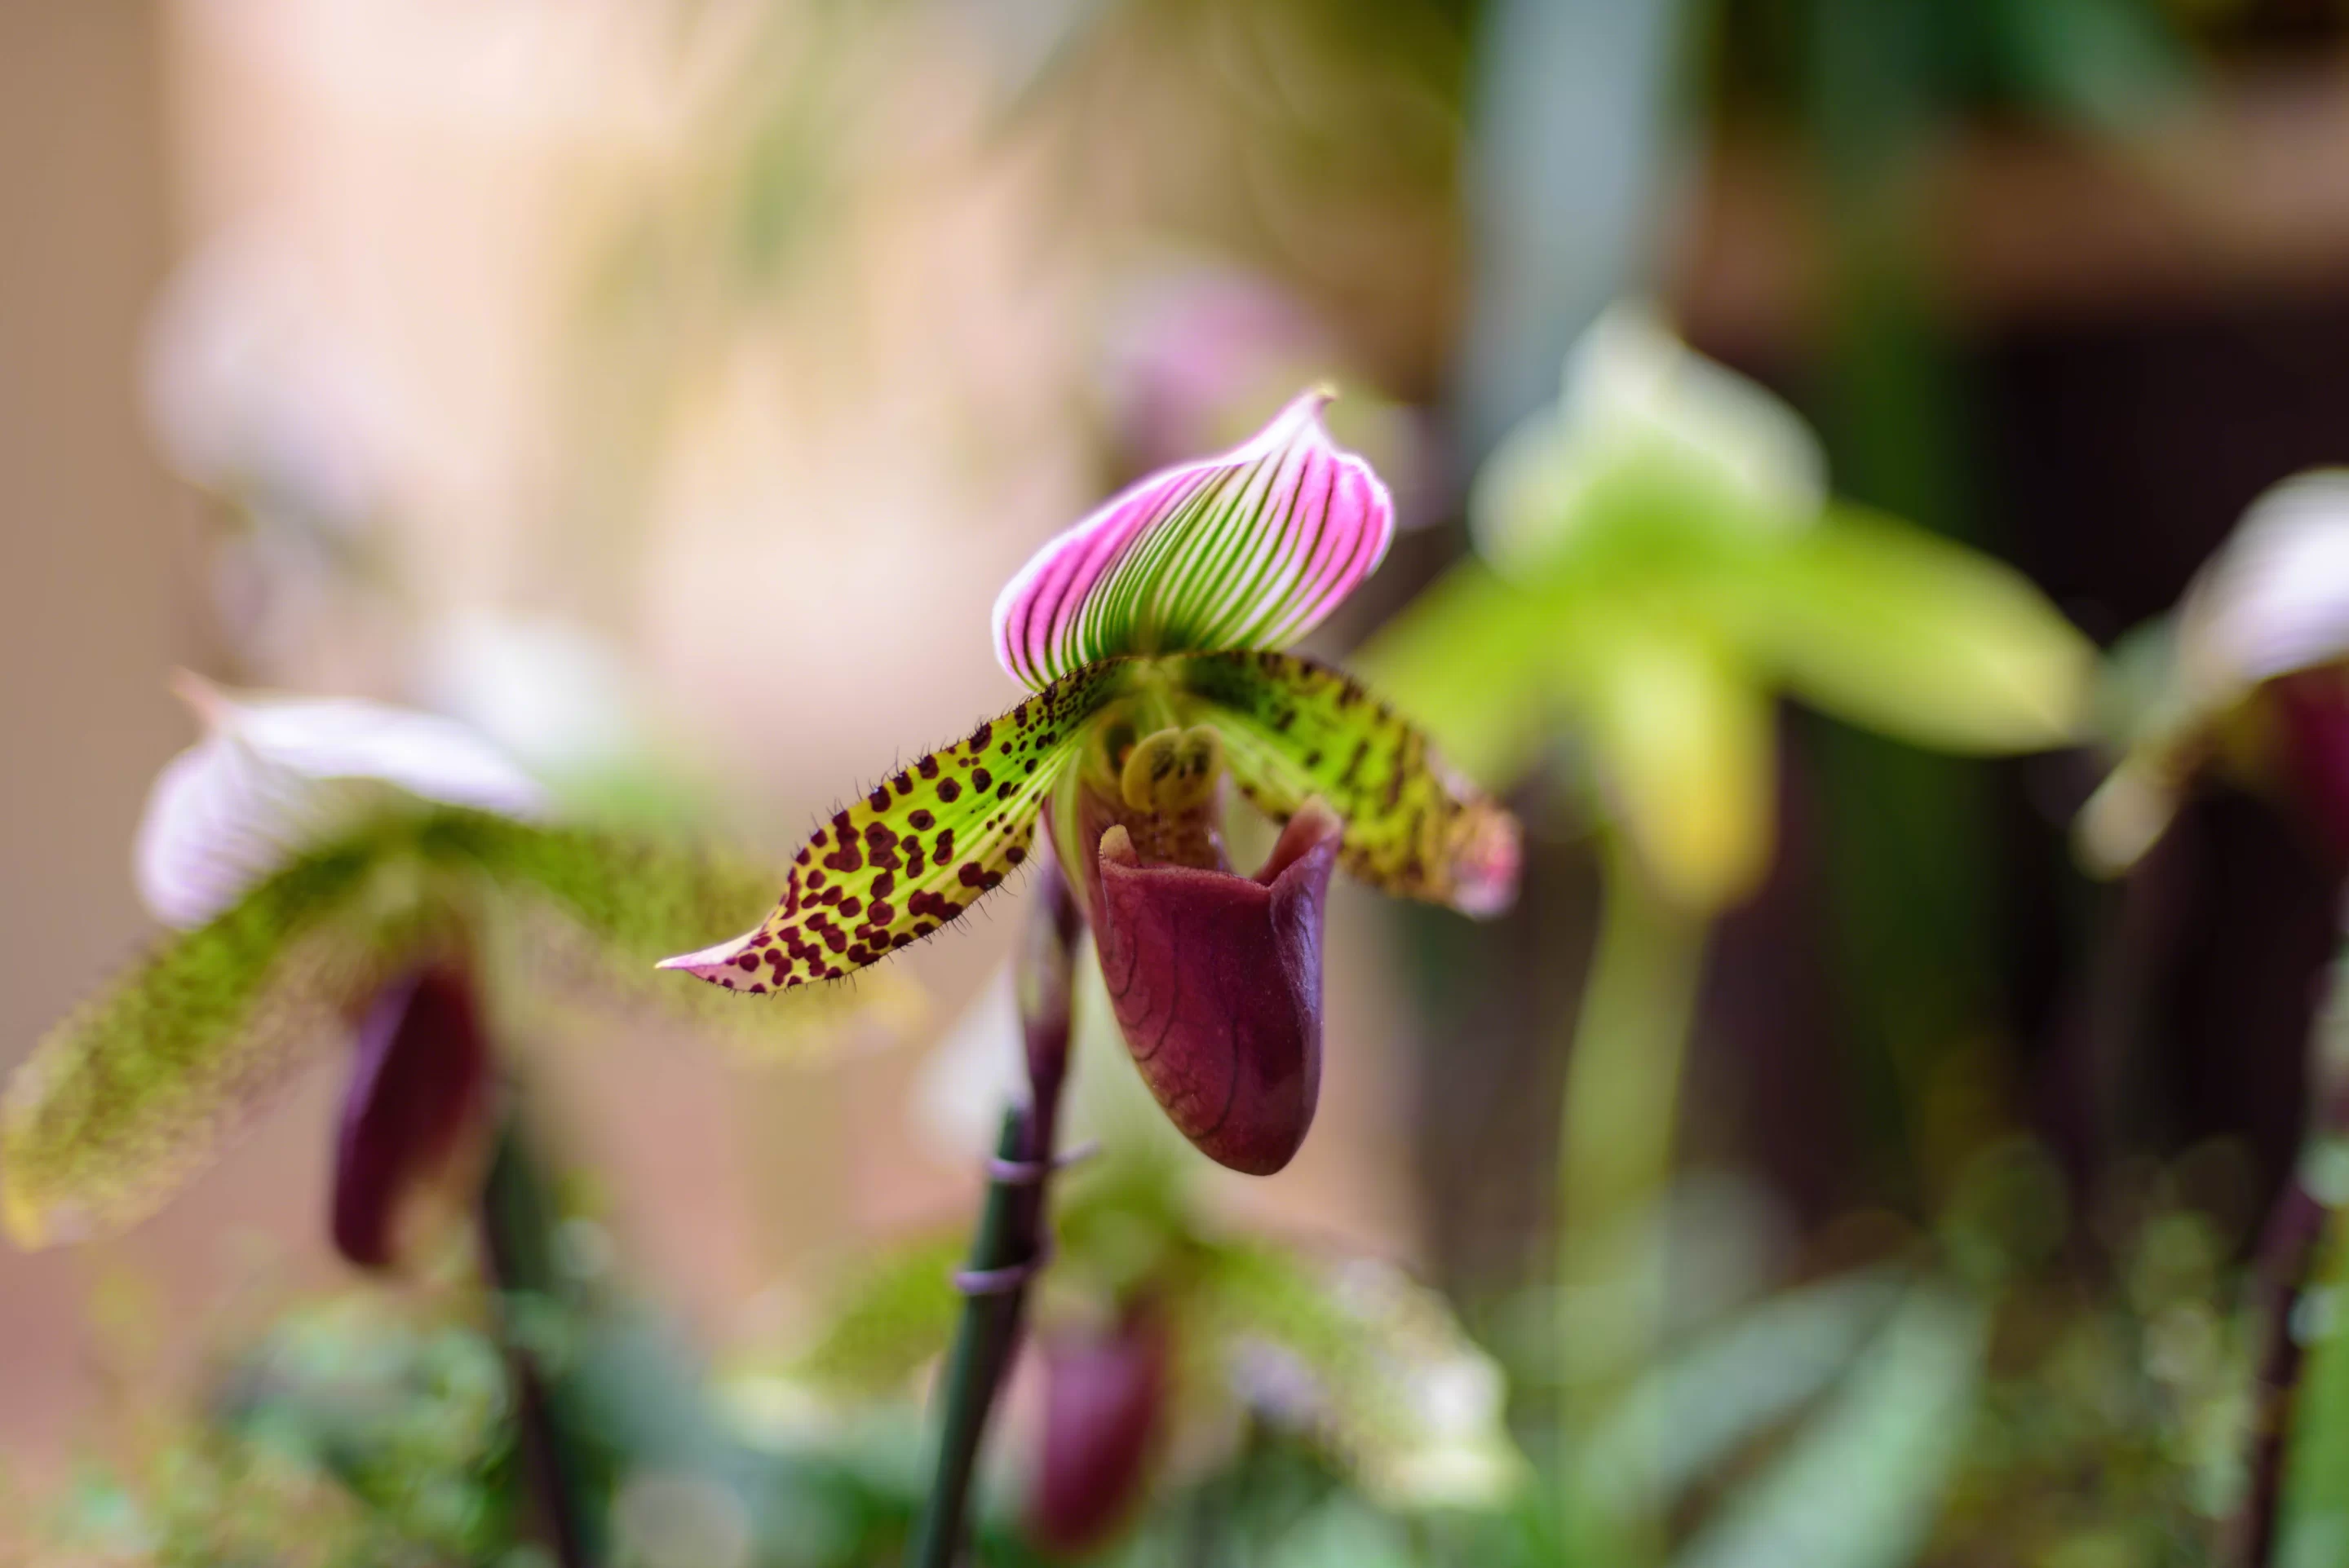 Join the National Orchid Show for a celebration of Costa Rica's natural beauty and passion for orchids!